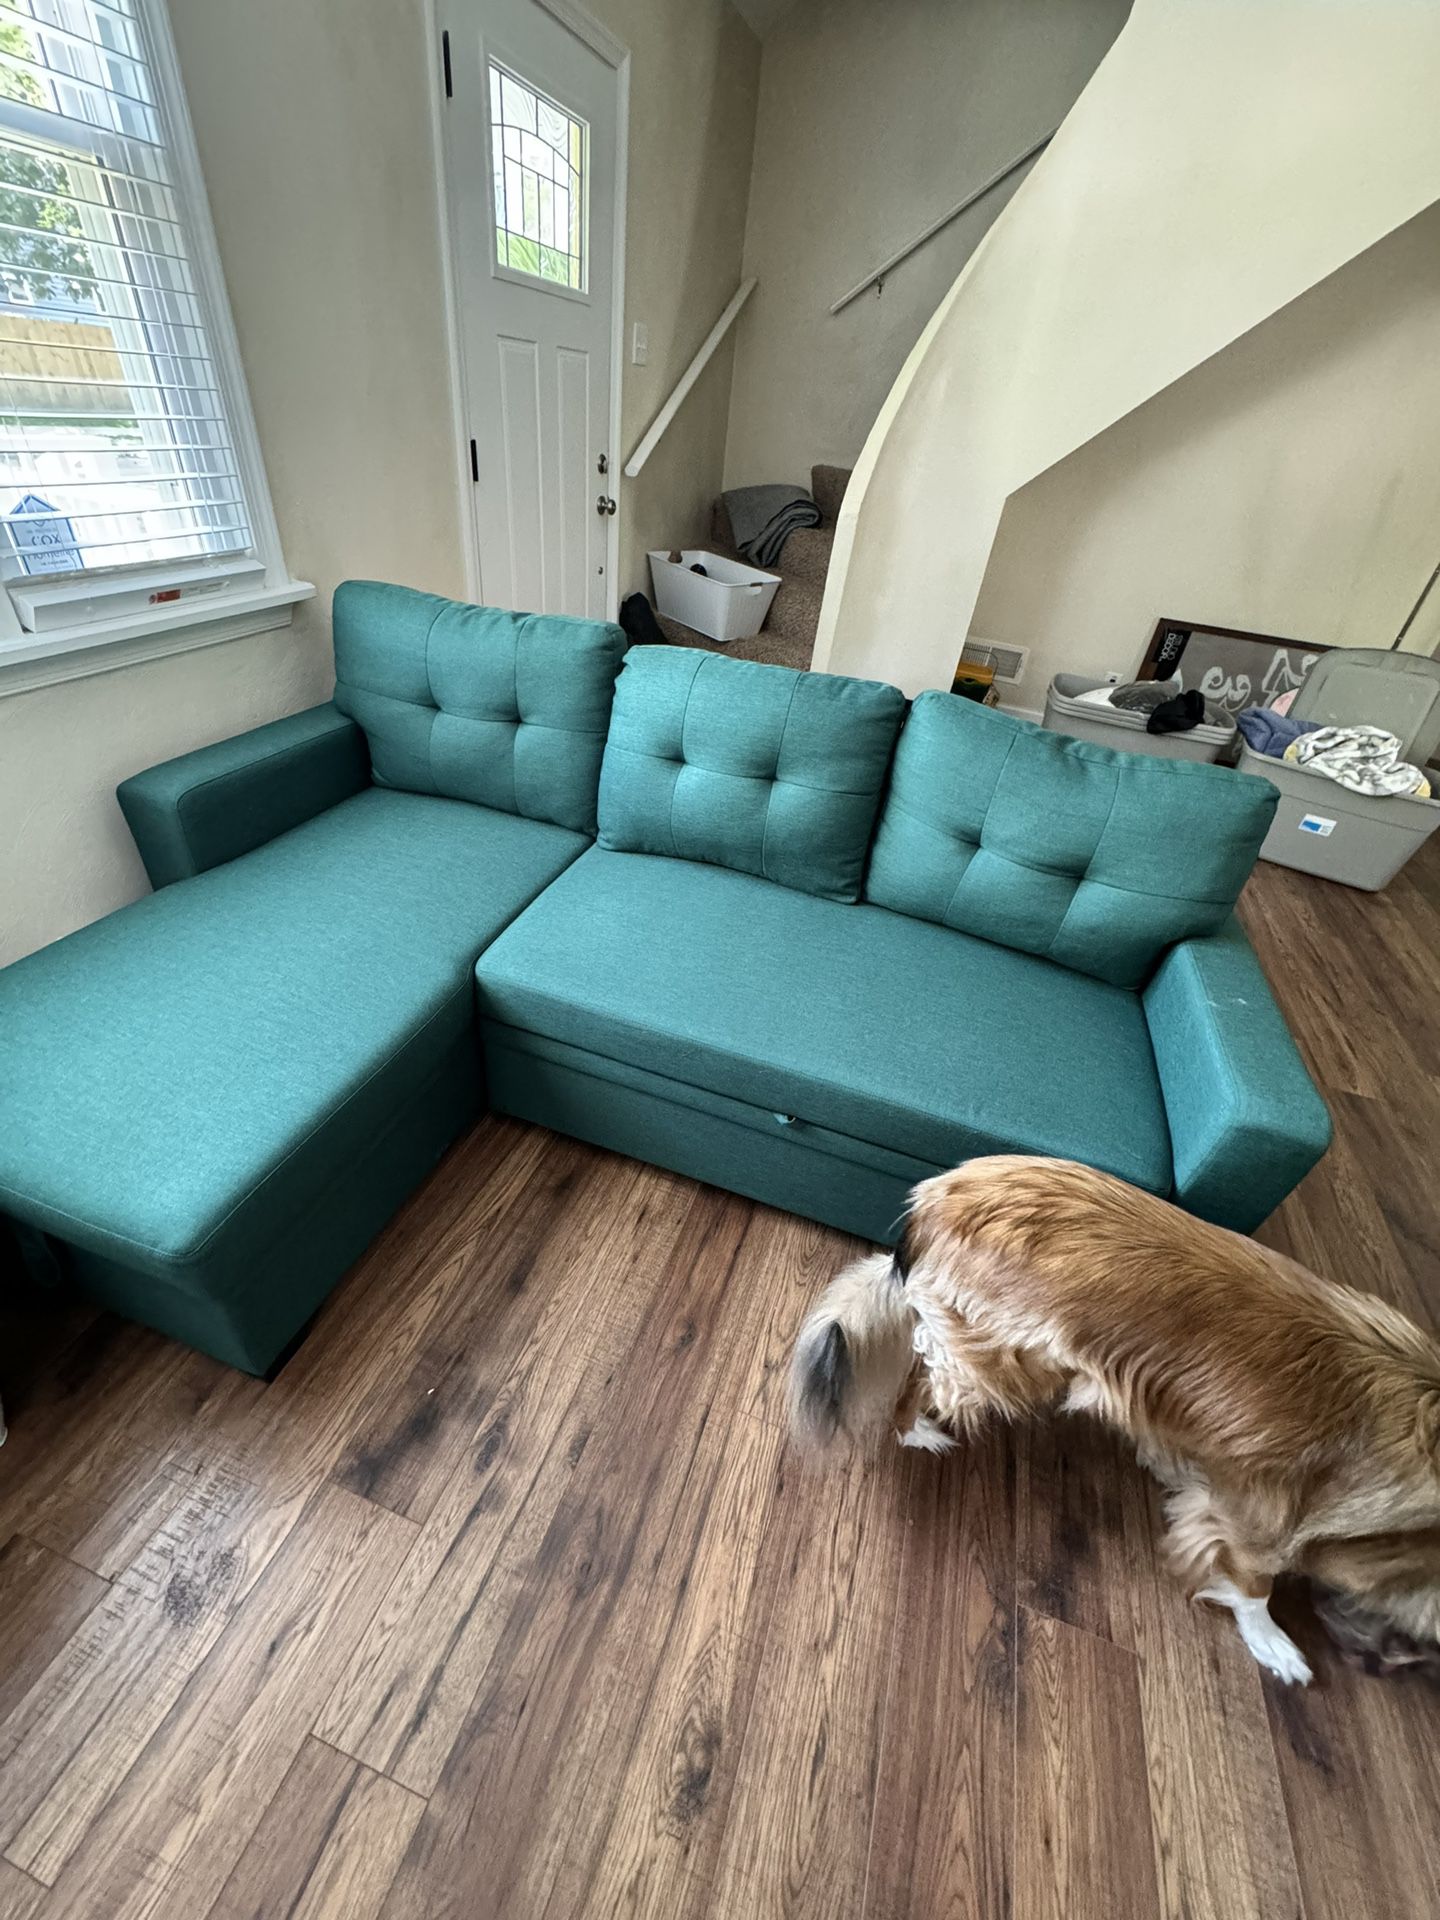 Green Couch from Amazon (Price Firm)